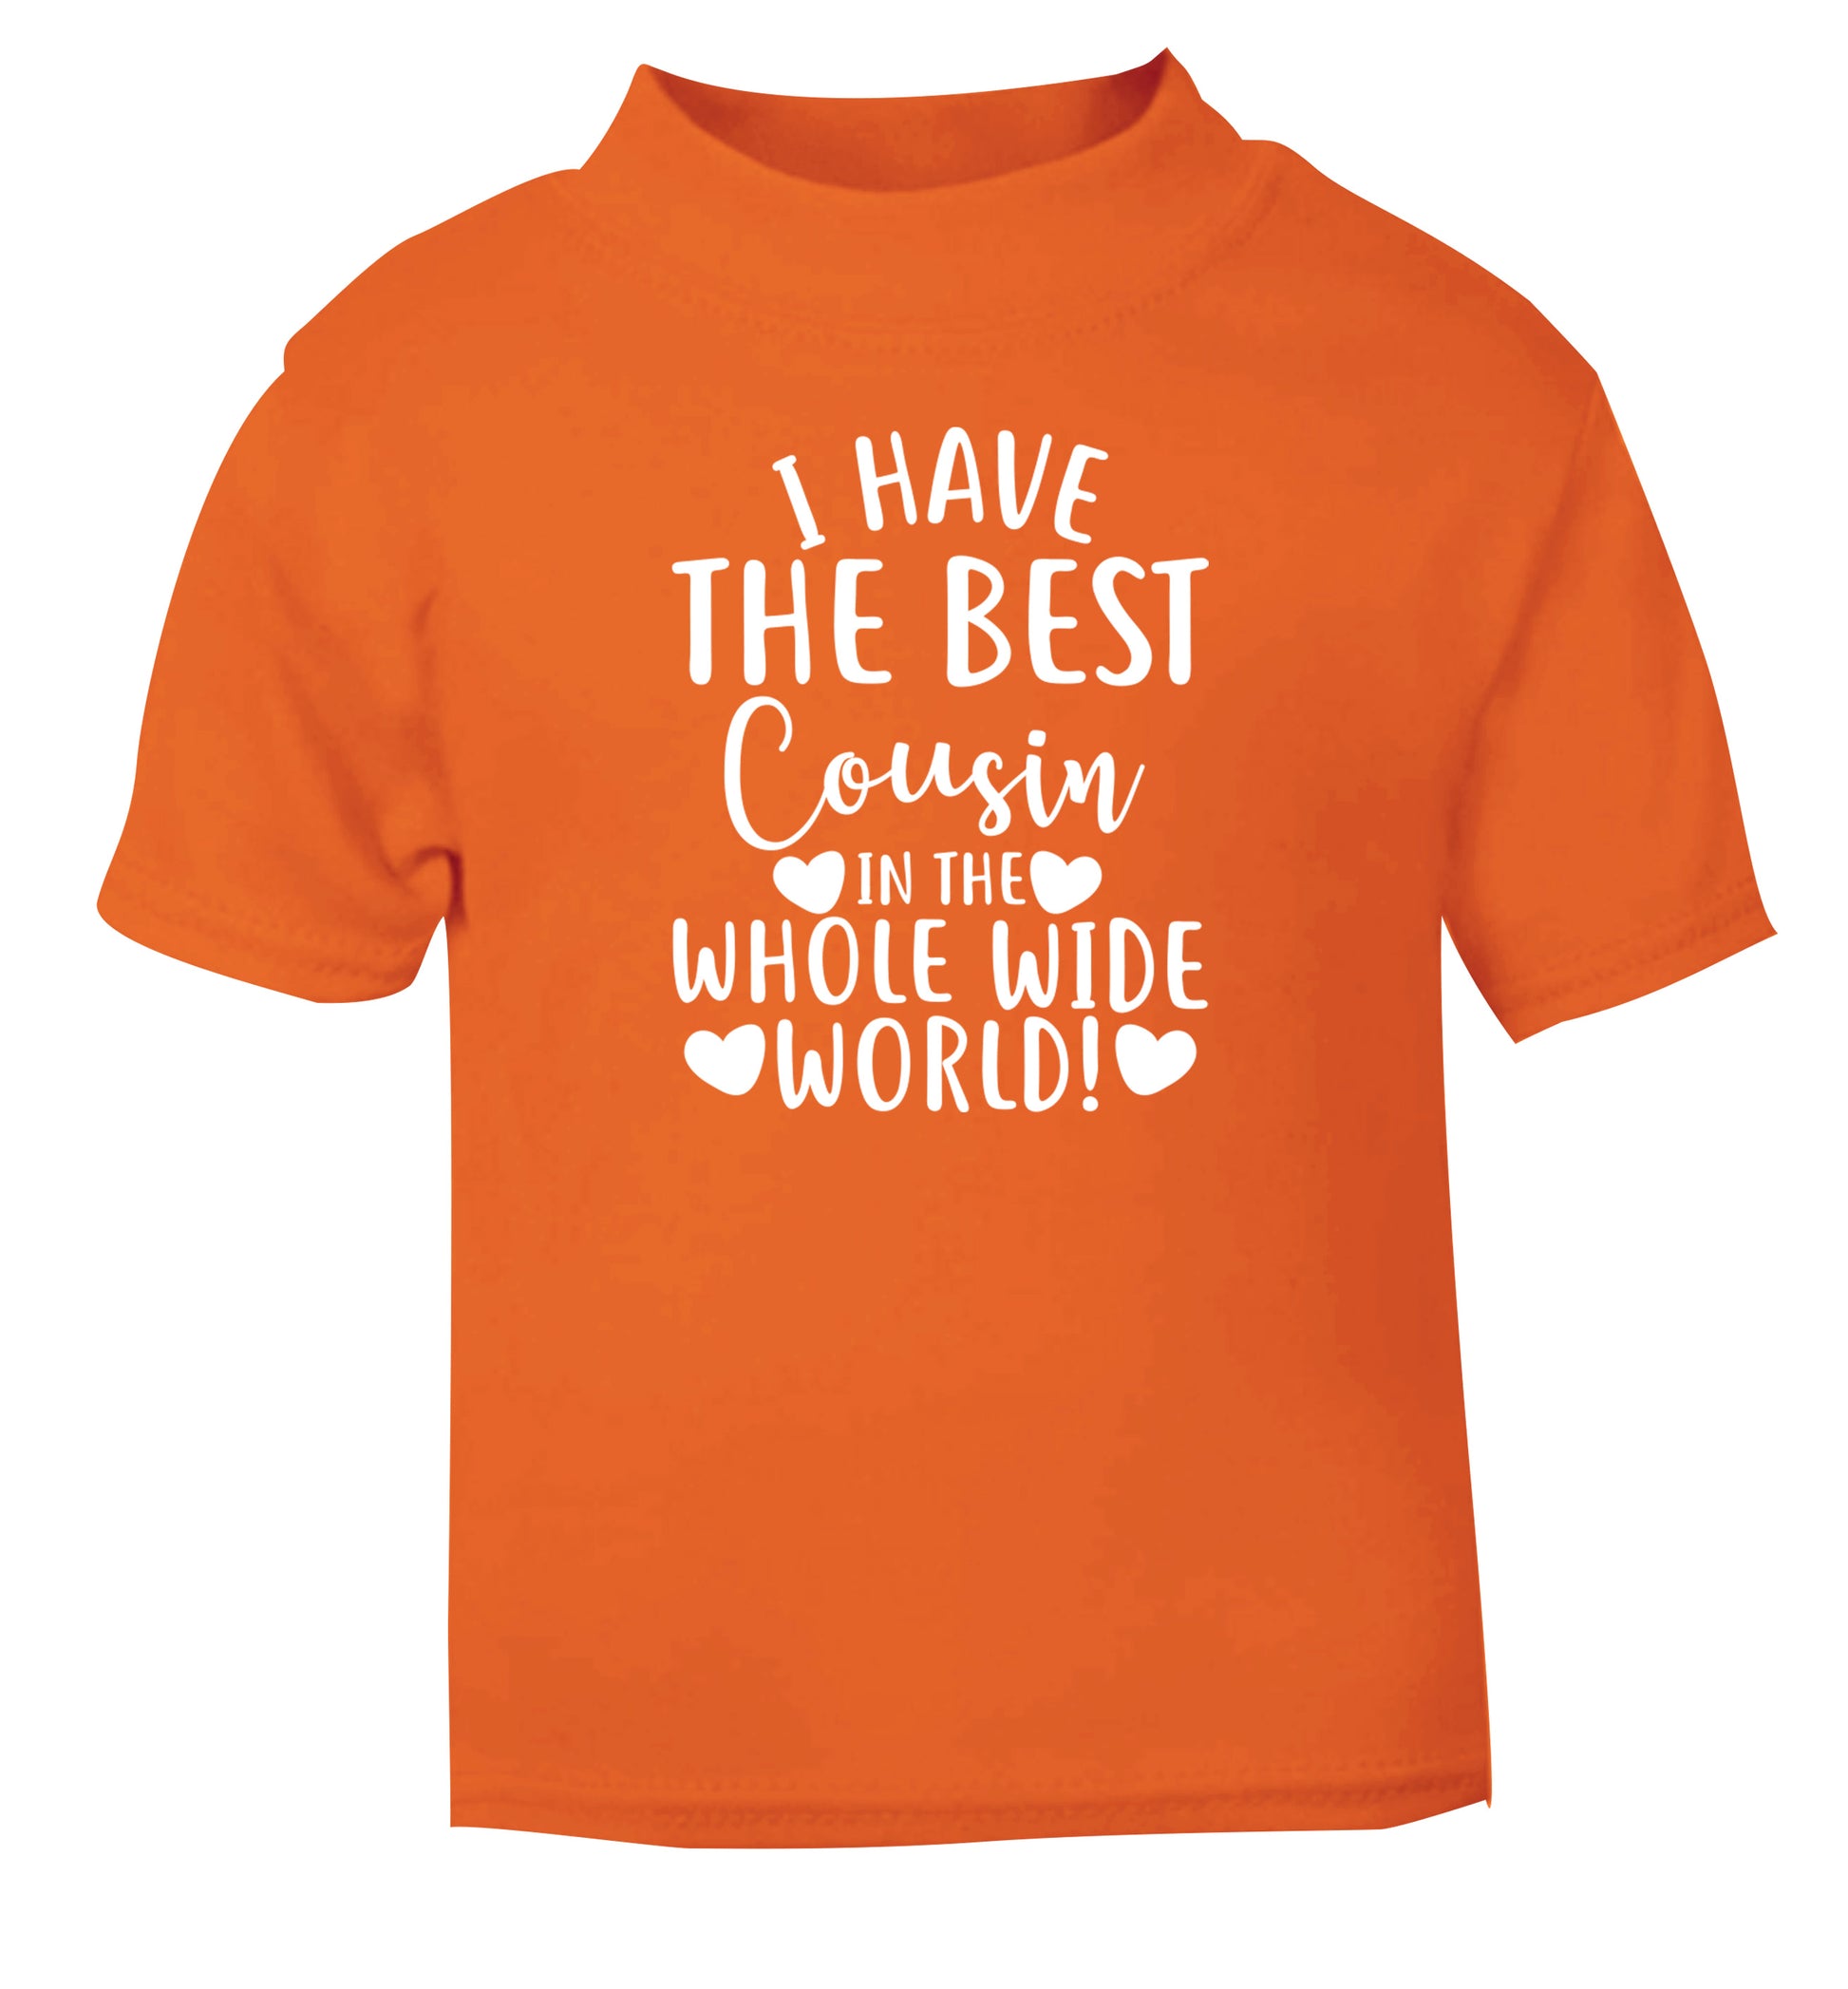 I have the best cousin in the whole wide world! orange Baby Toddler Tshirt 2 Years